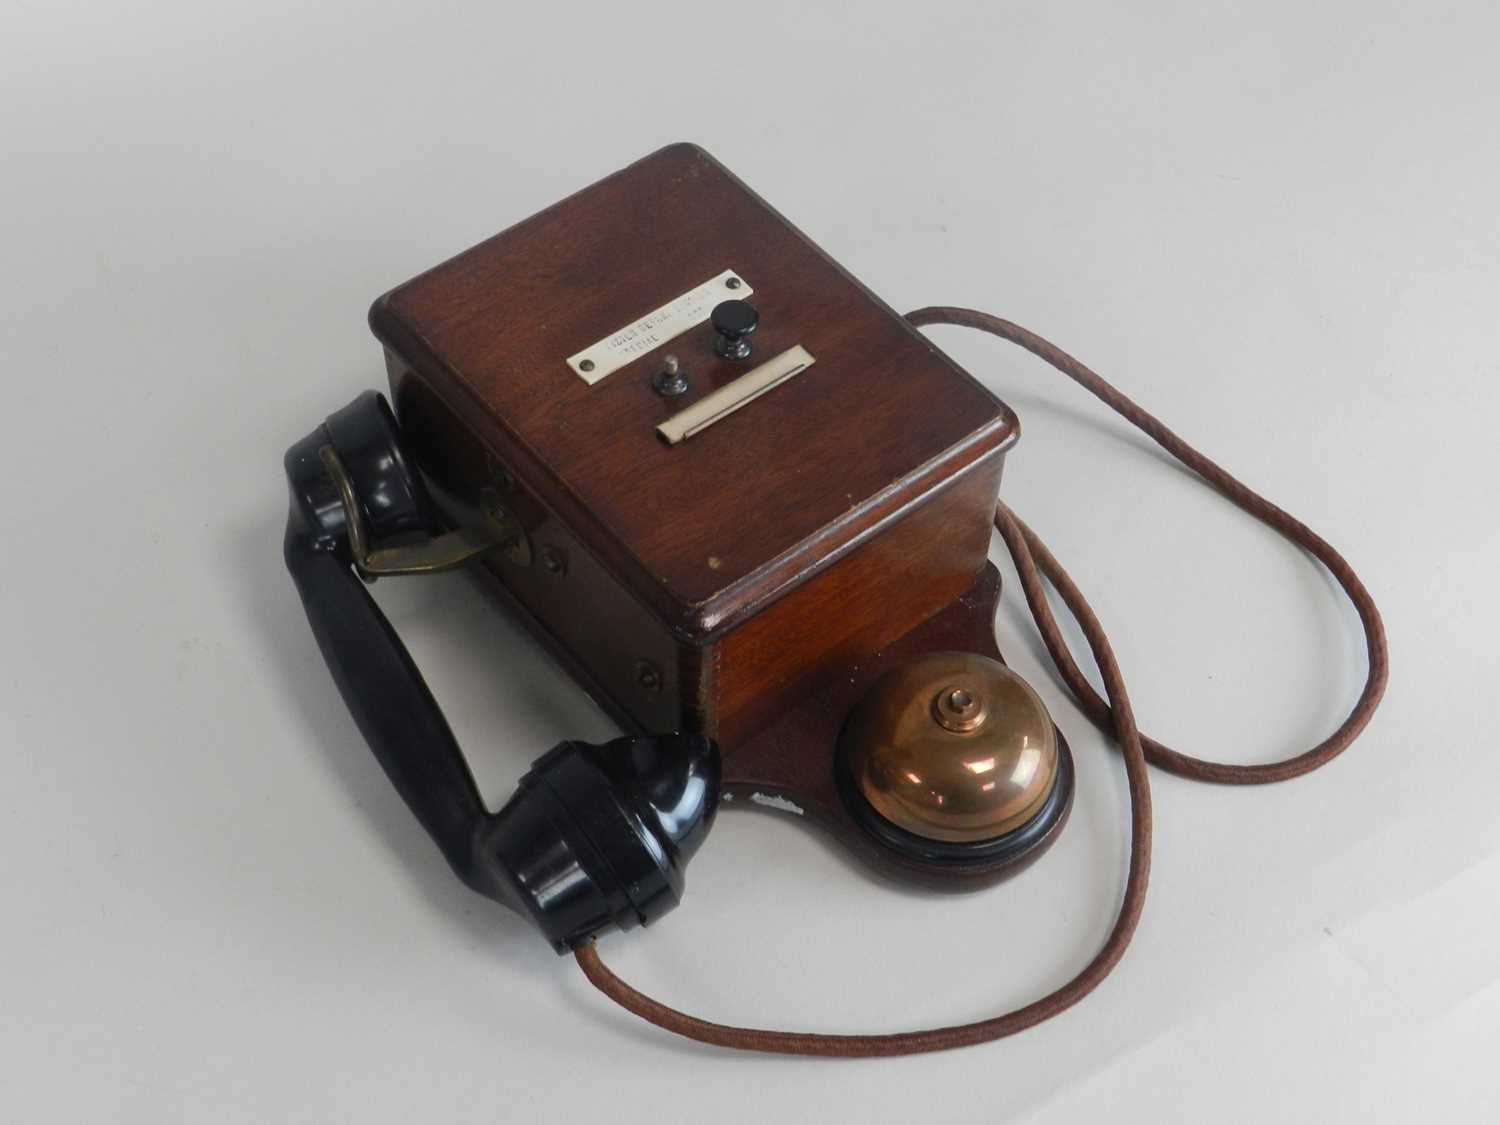 A wall-mounted mahogany-cased telephone, with Bakelite receiver and two push buttons.